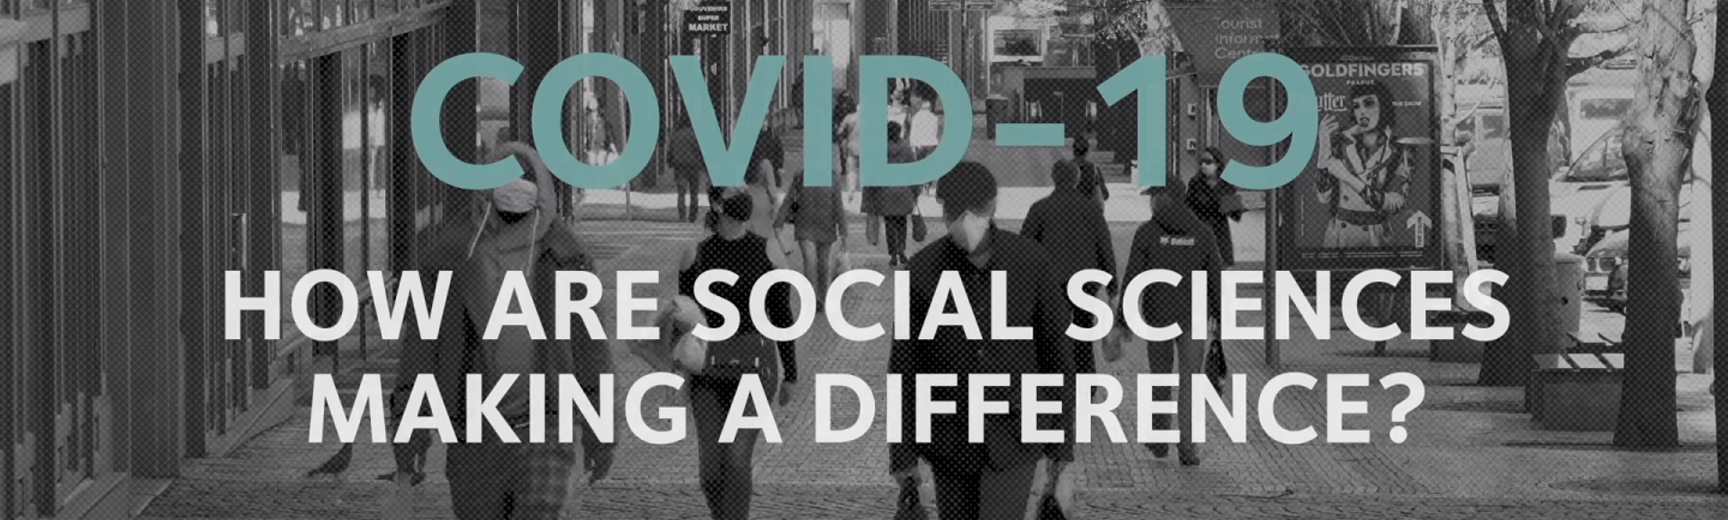 Title COVID-19: How are social sciences making a difference? superimposed on a black and white image of a high street with a few people wearing face masks